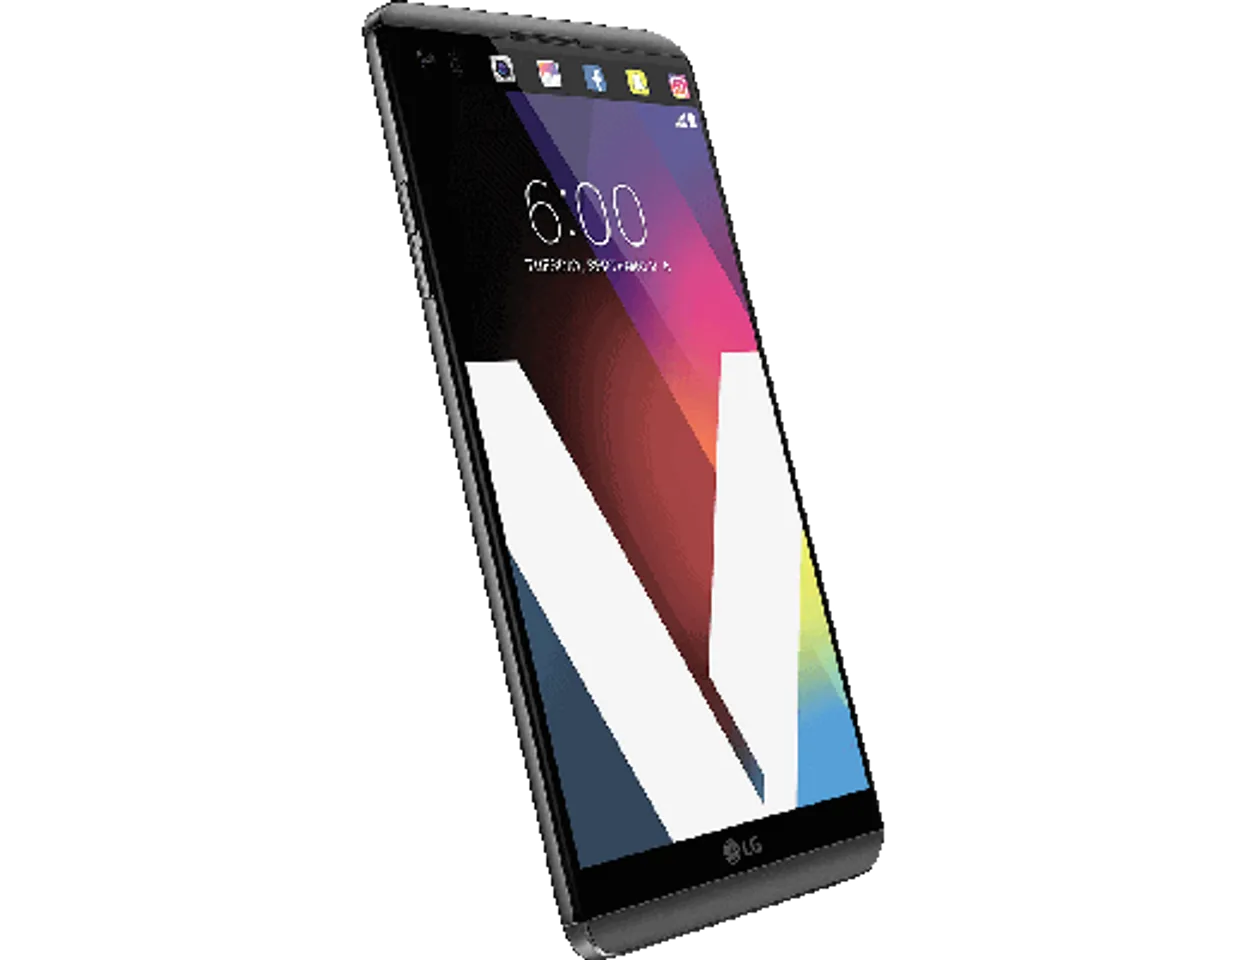 LG V20 Review: Spectacular phone, interesting features, great audio quality!